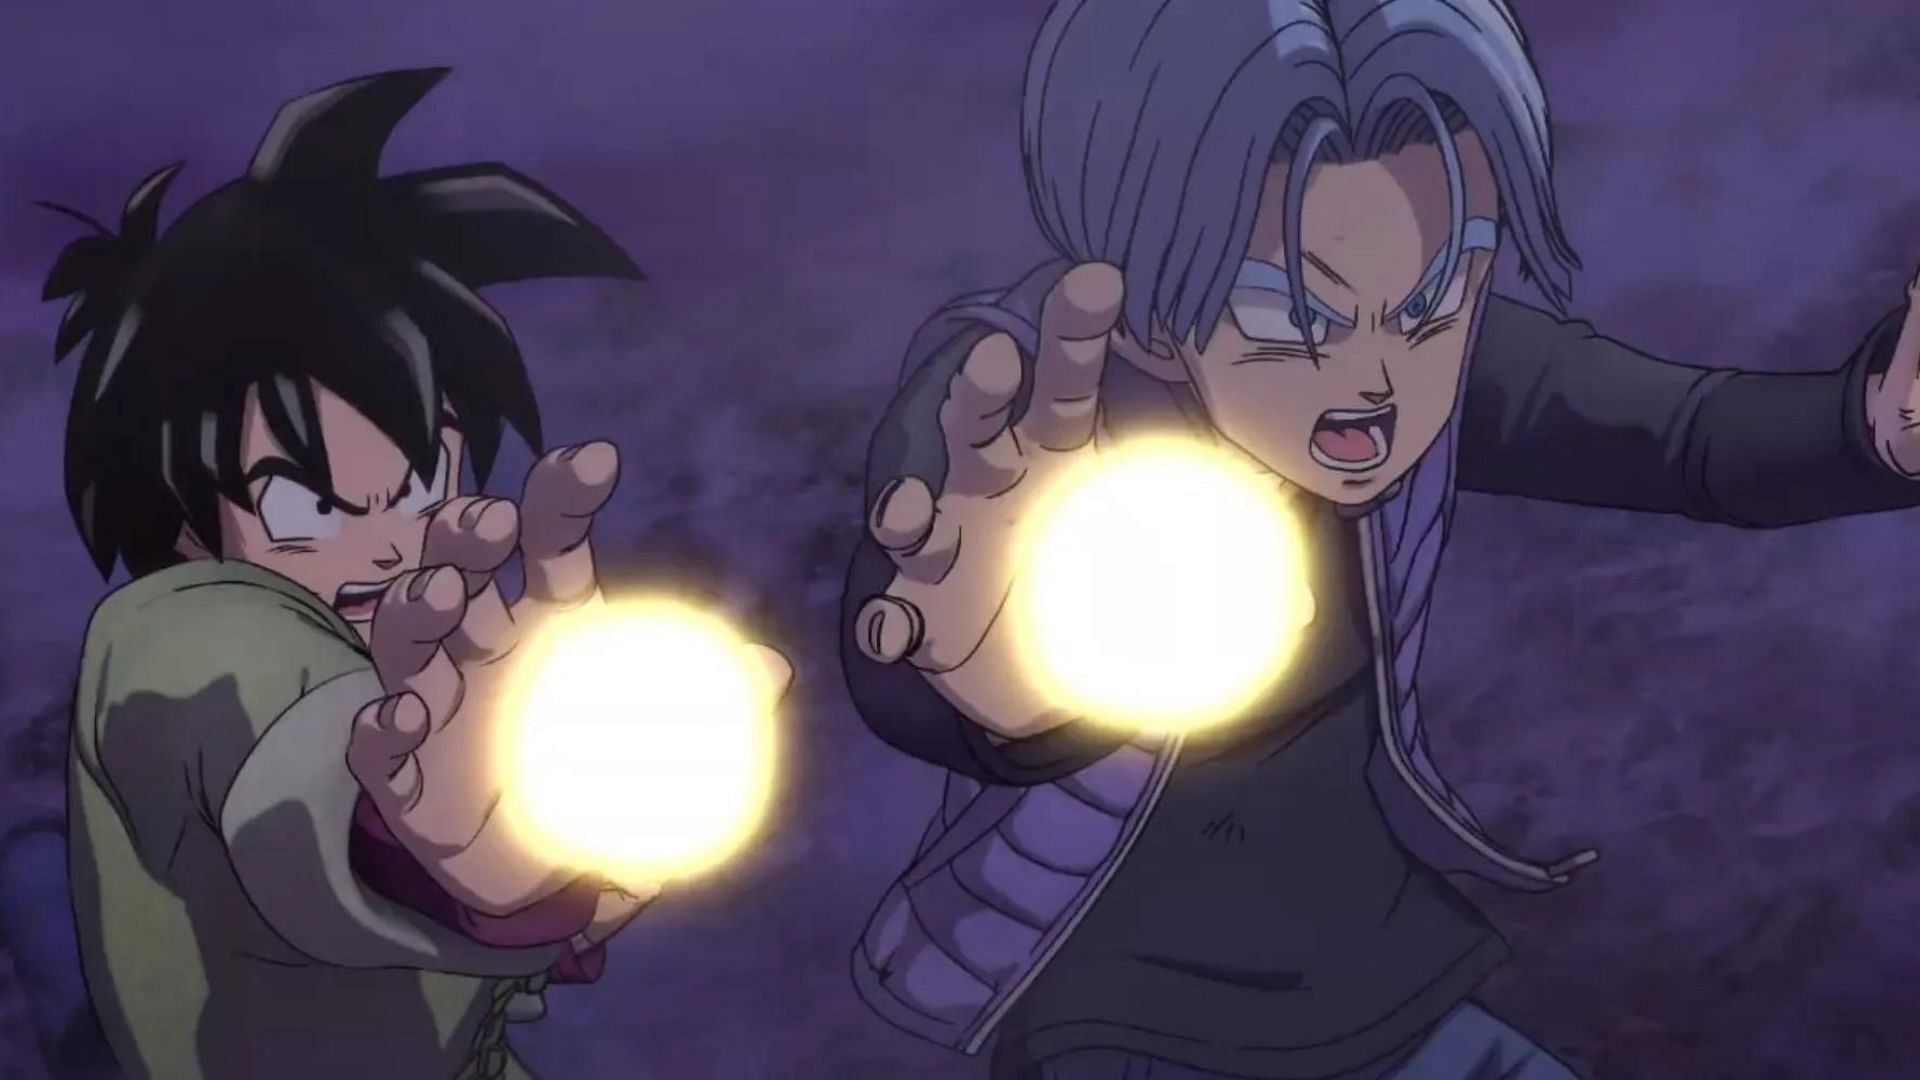 Goten and Trunks as seen in the movie (Image via Toei Animation)